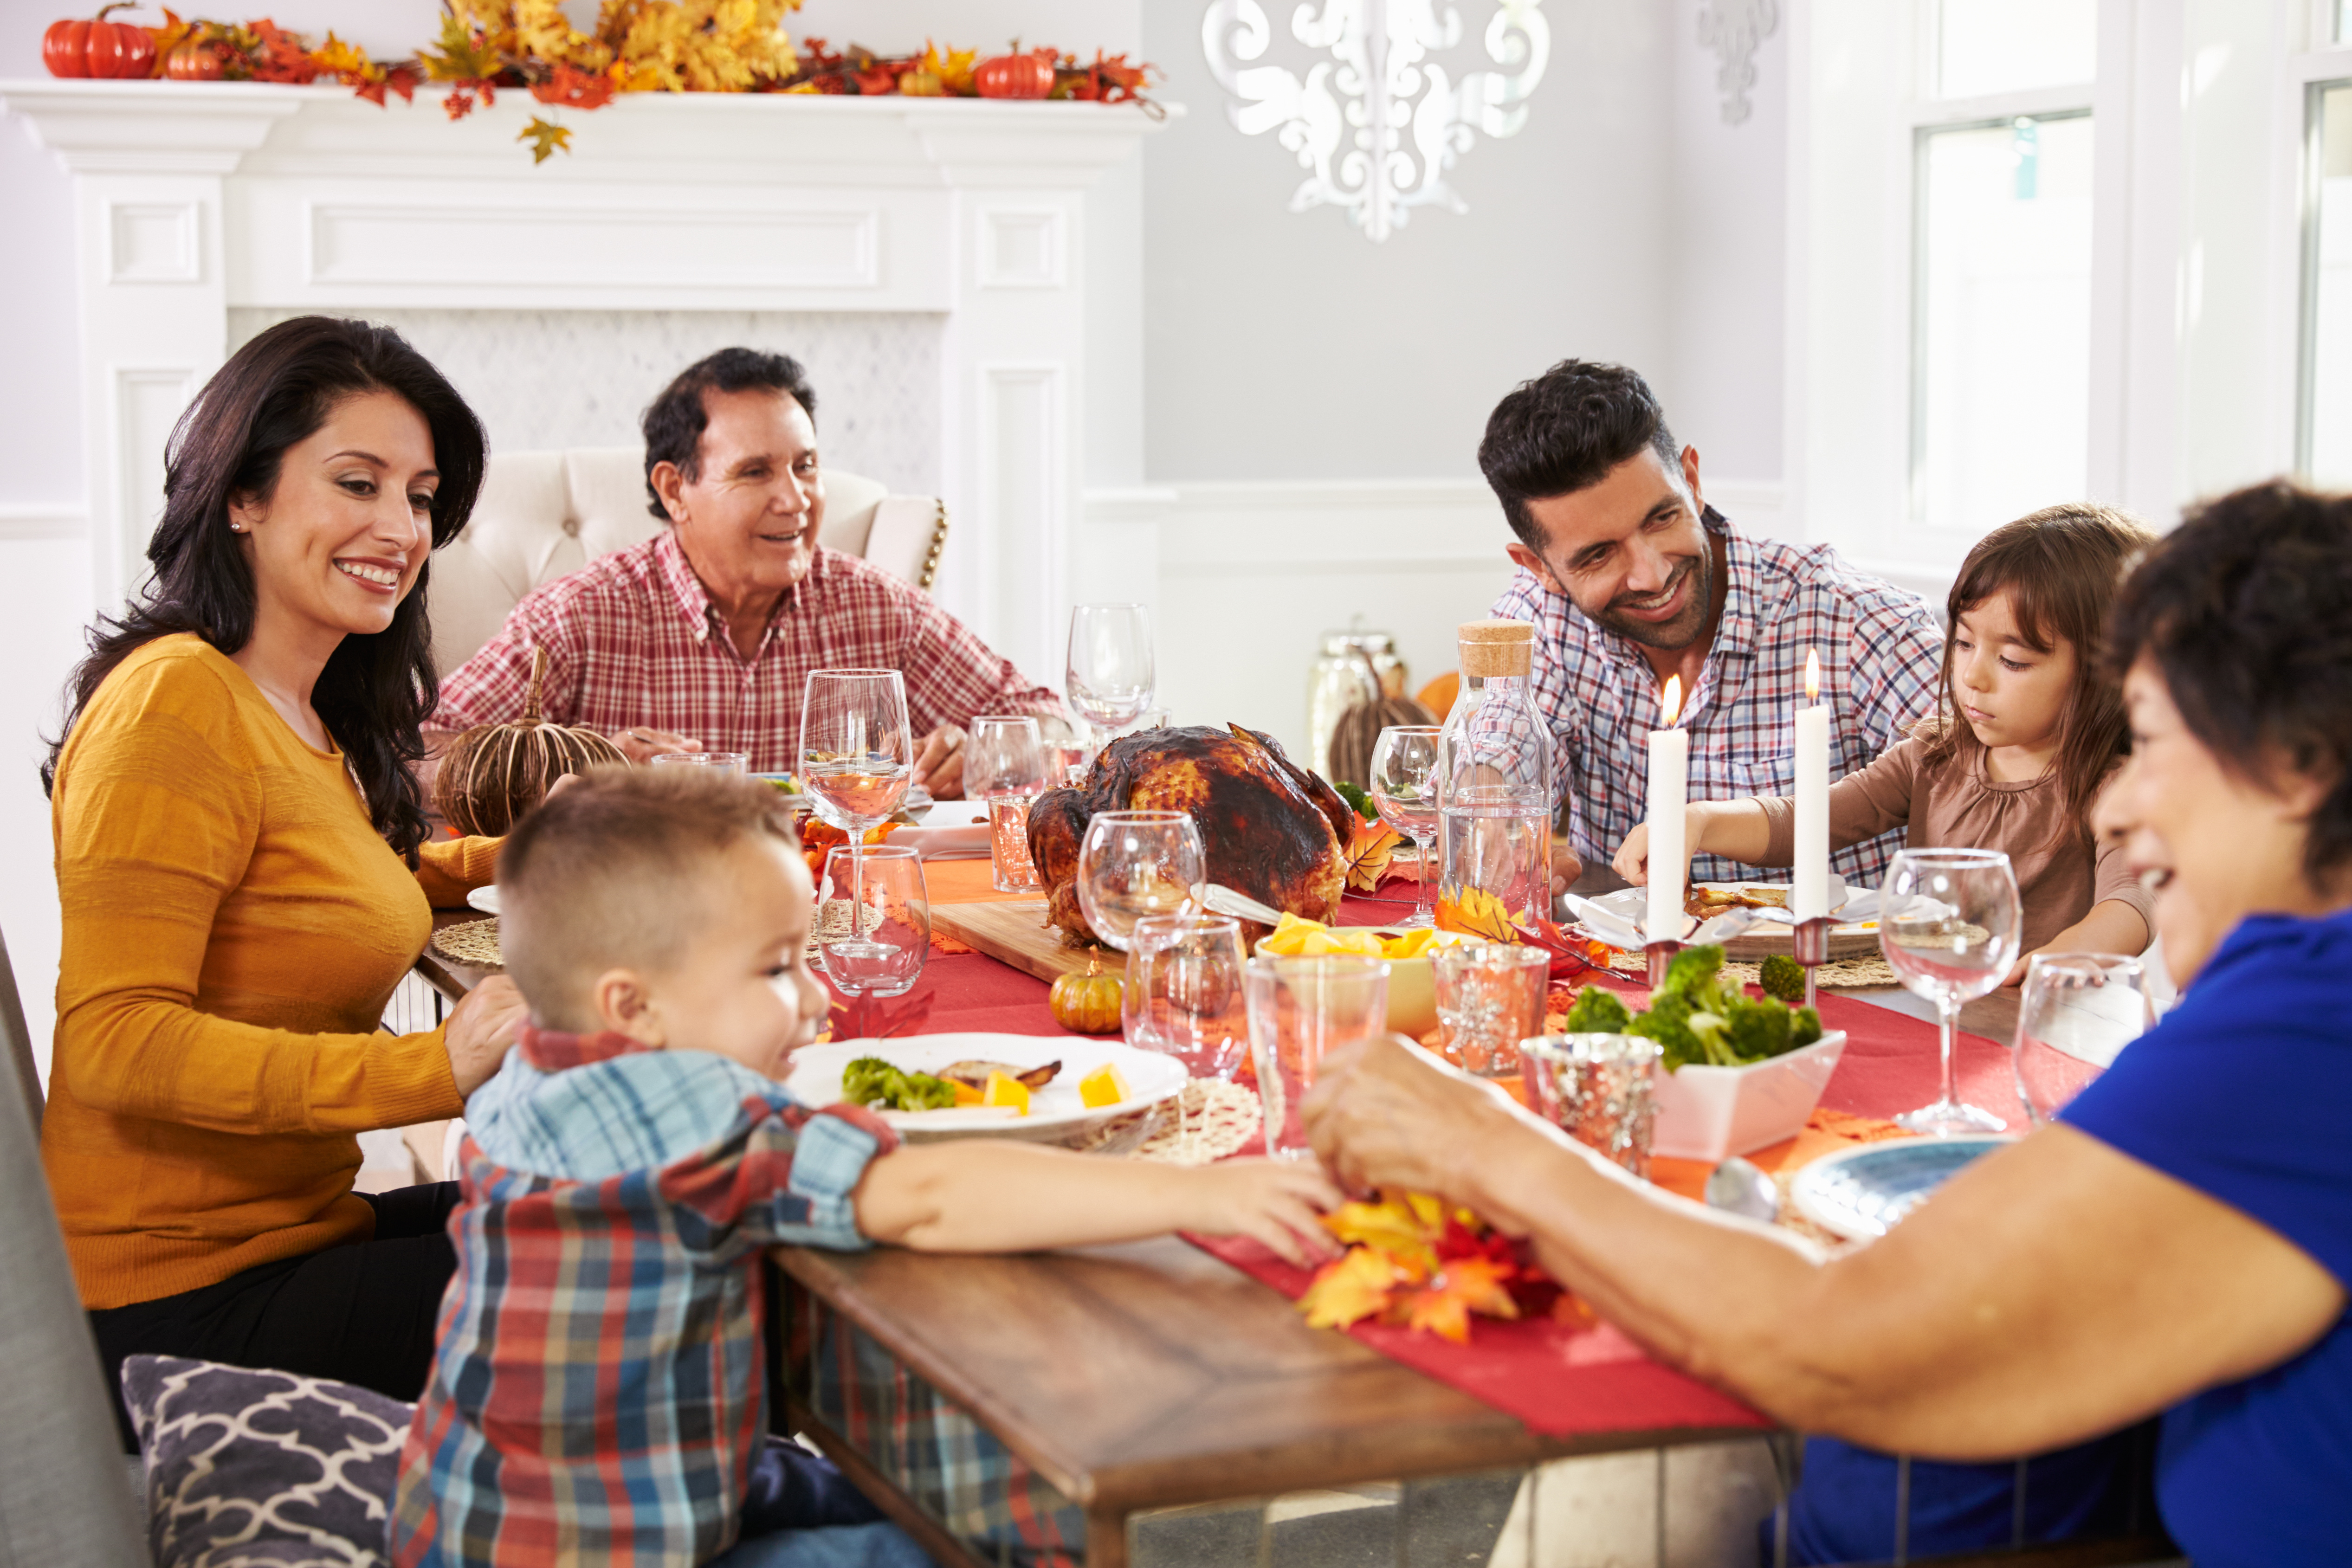 family-with-grandparents-enjoying-thanksgiving-meal-at-table